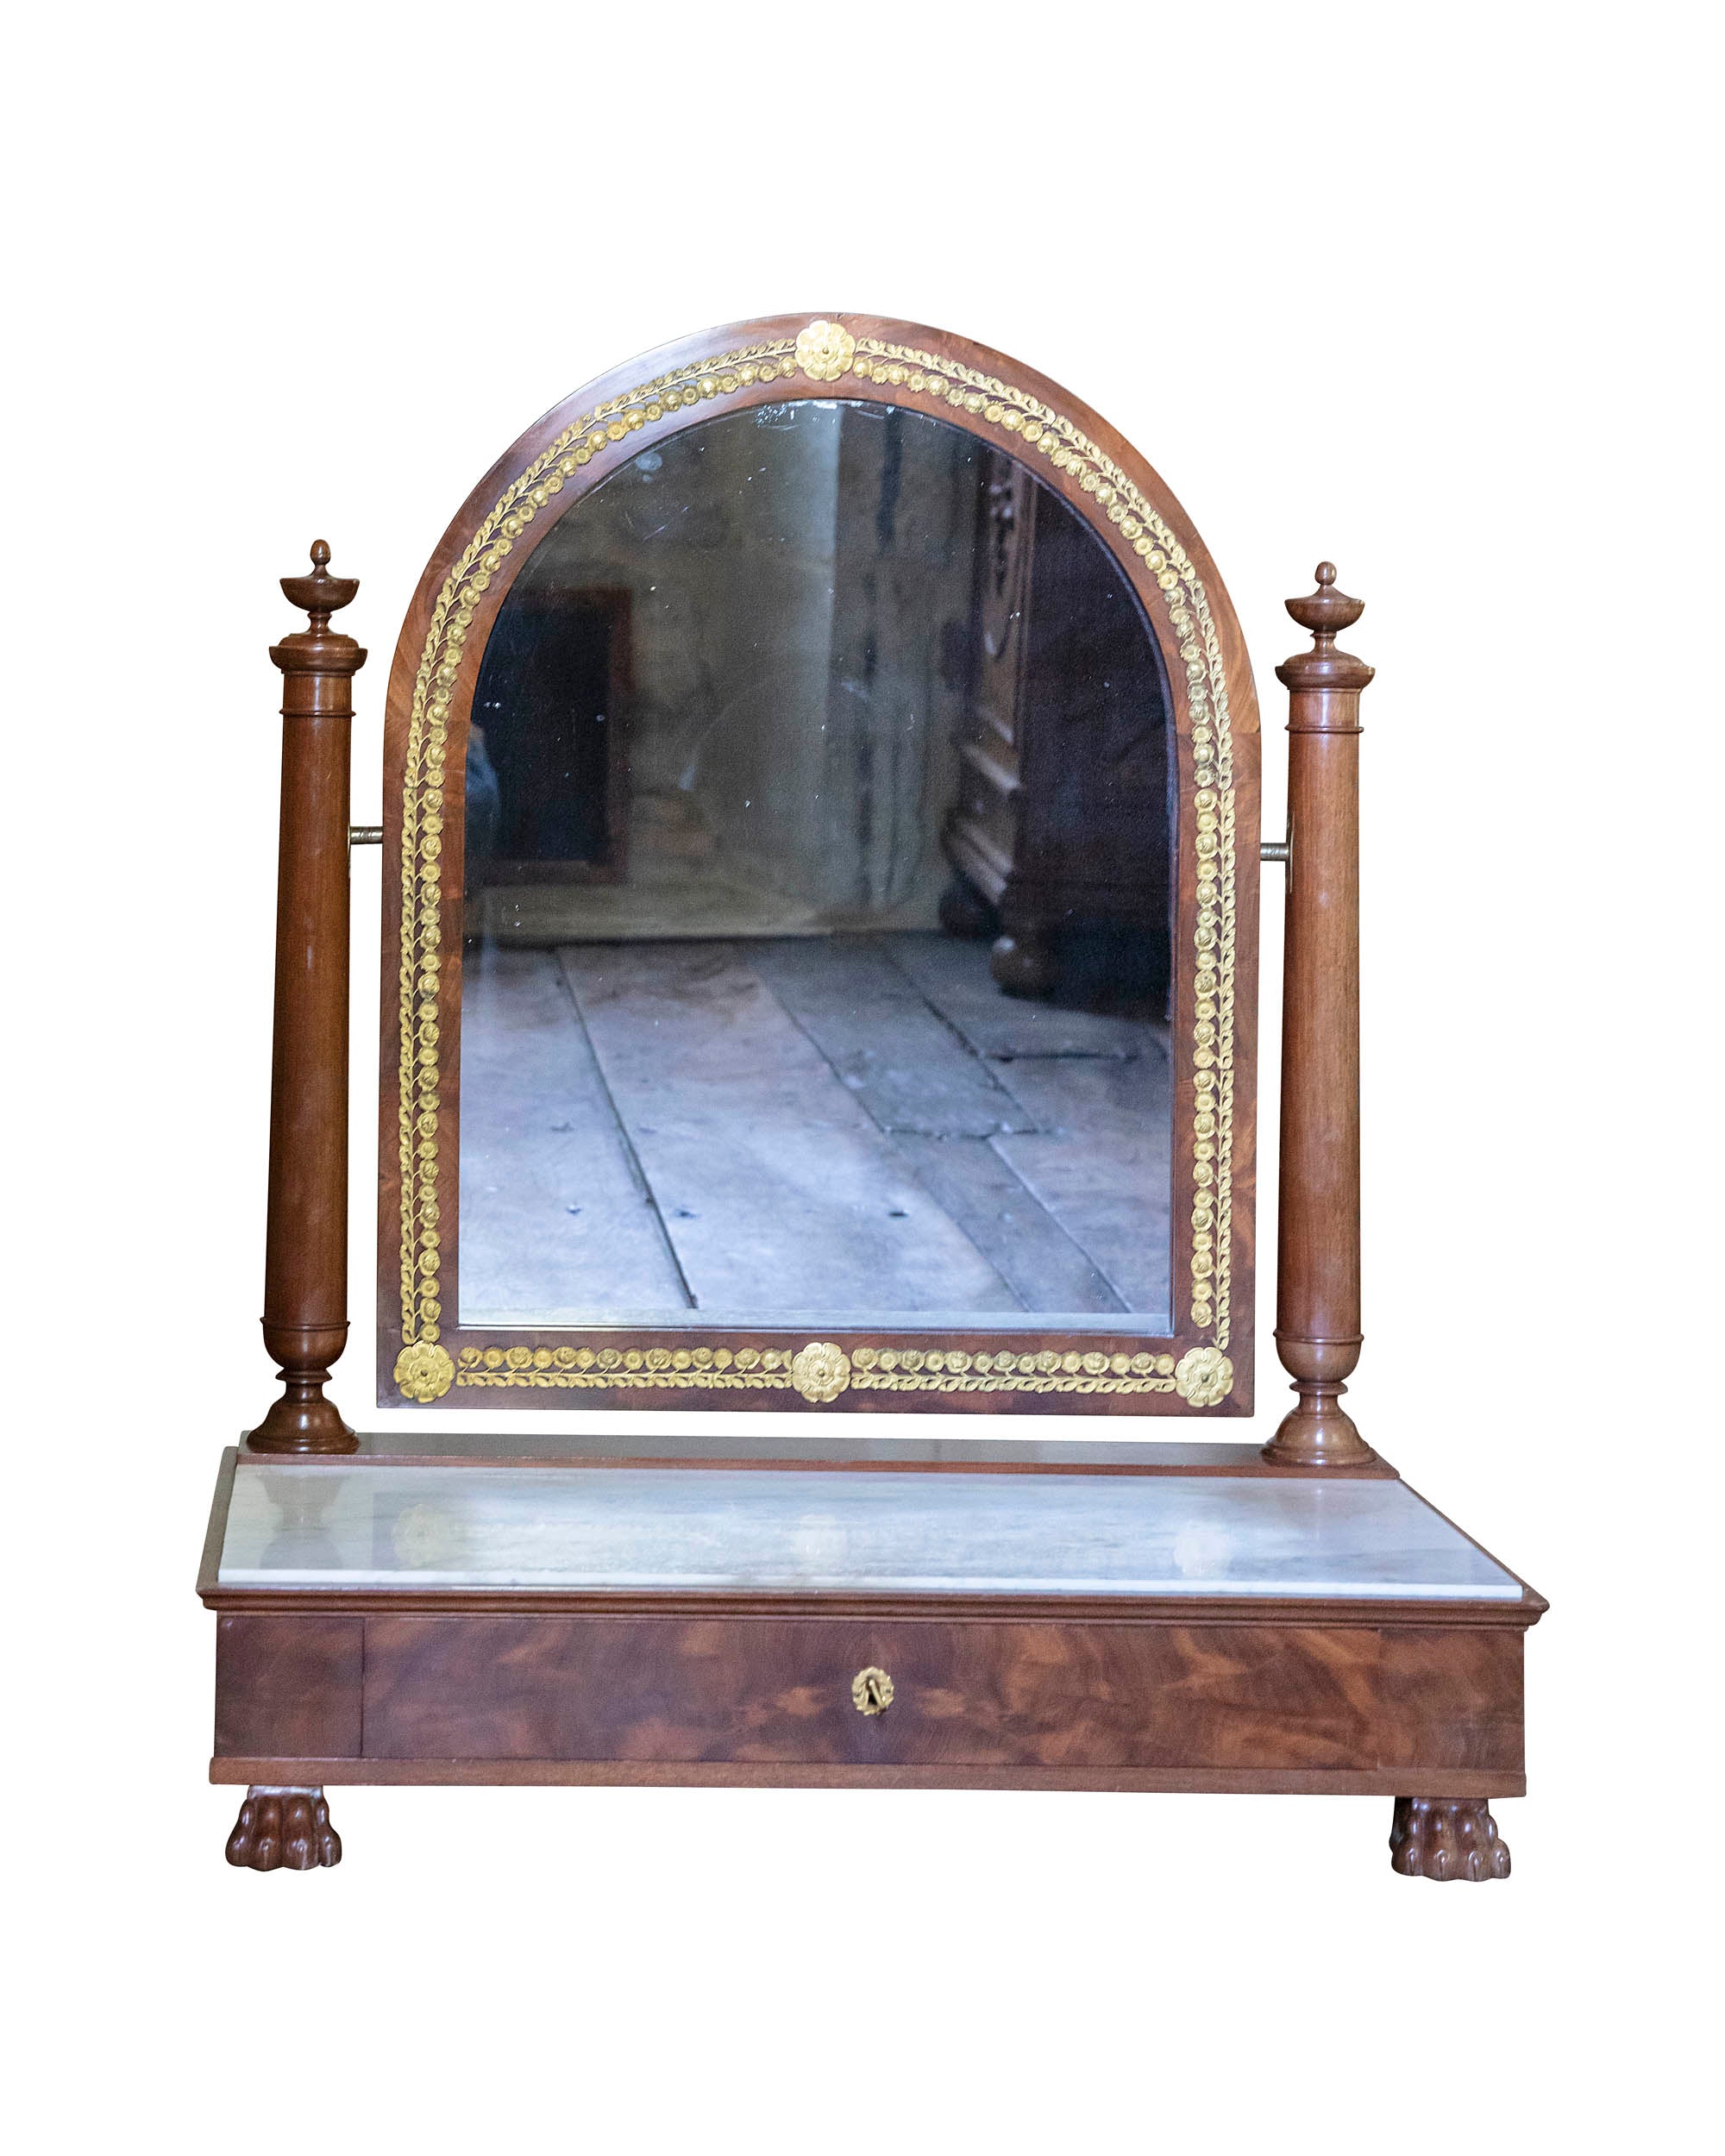 Mahogany cheval mirror with empire-style gilt bronze frieze and white marble top